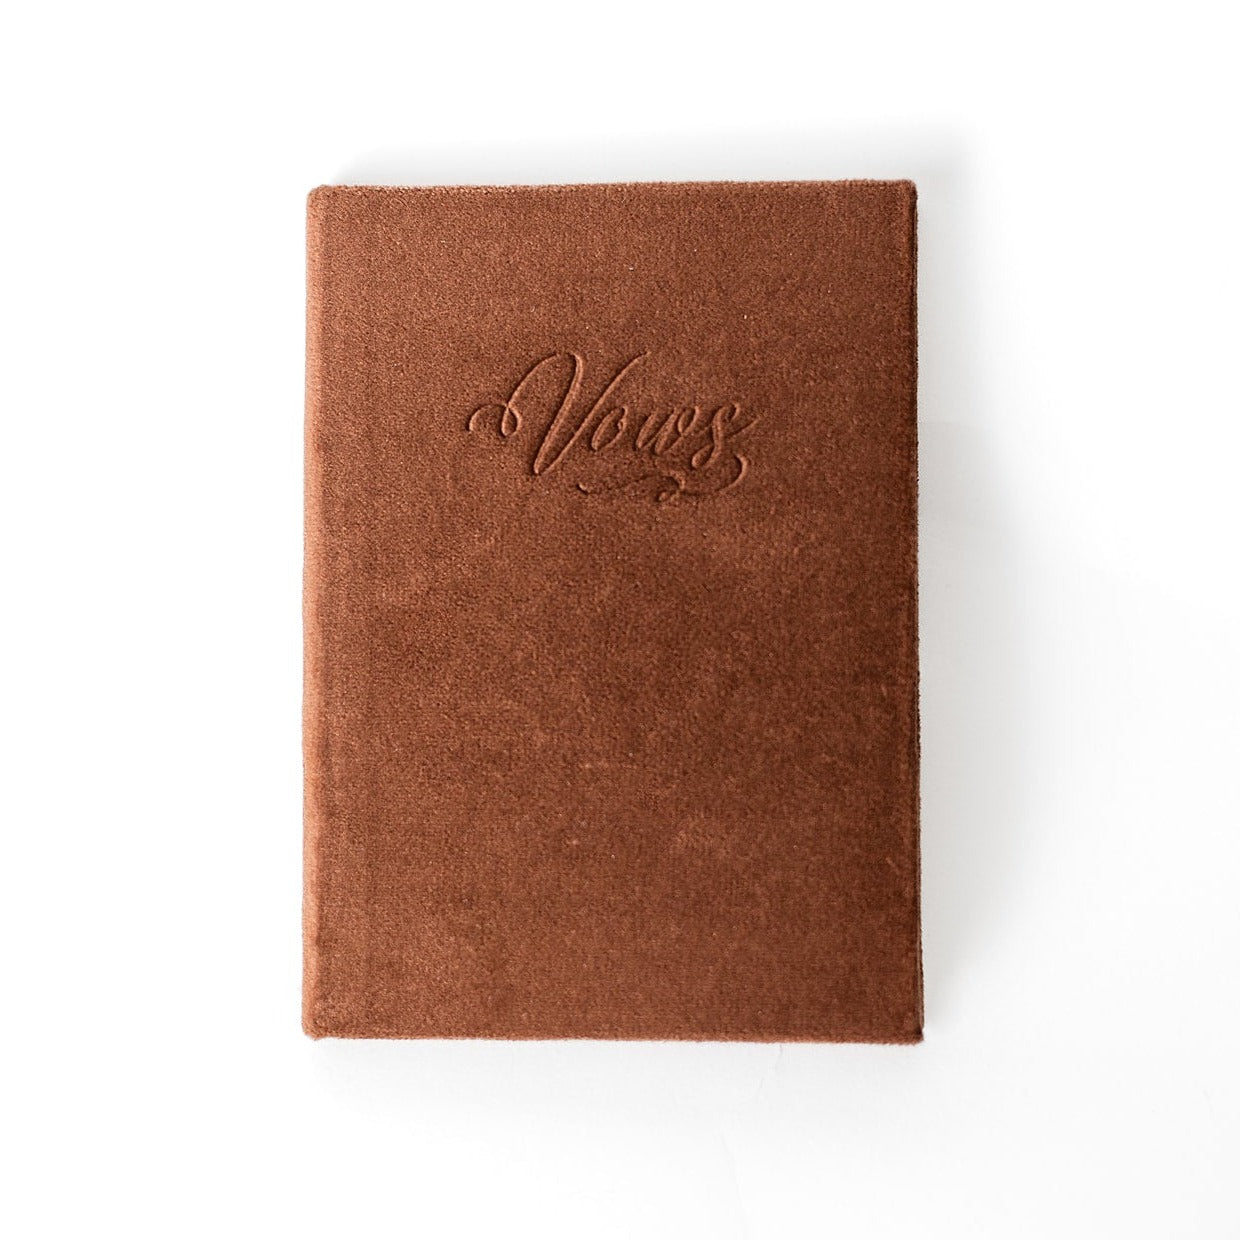 A chocolate-coloured vow book with the word "Vows" embossed on the front cover.